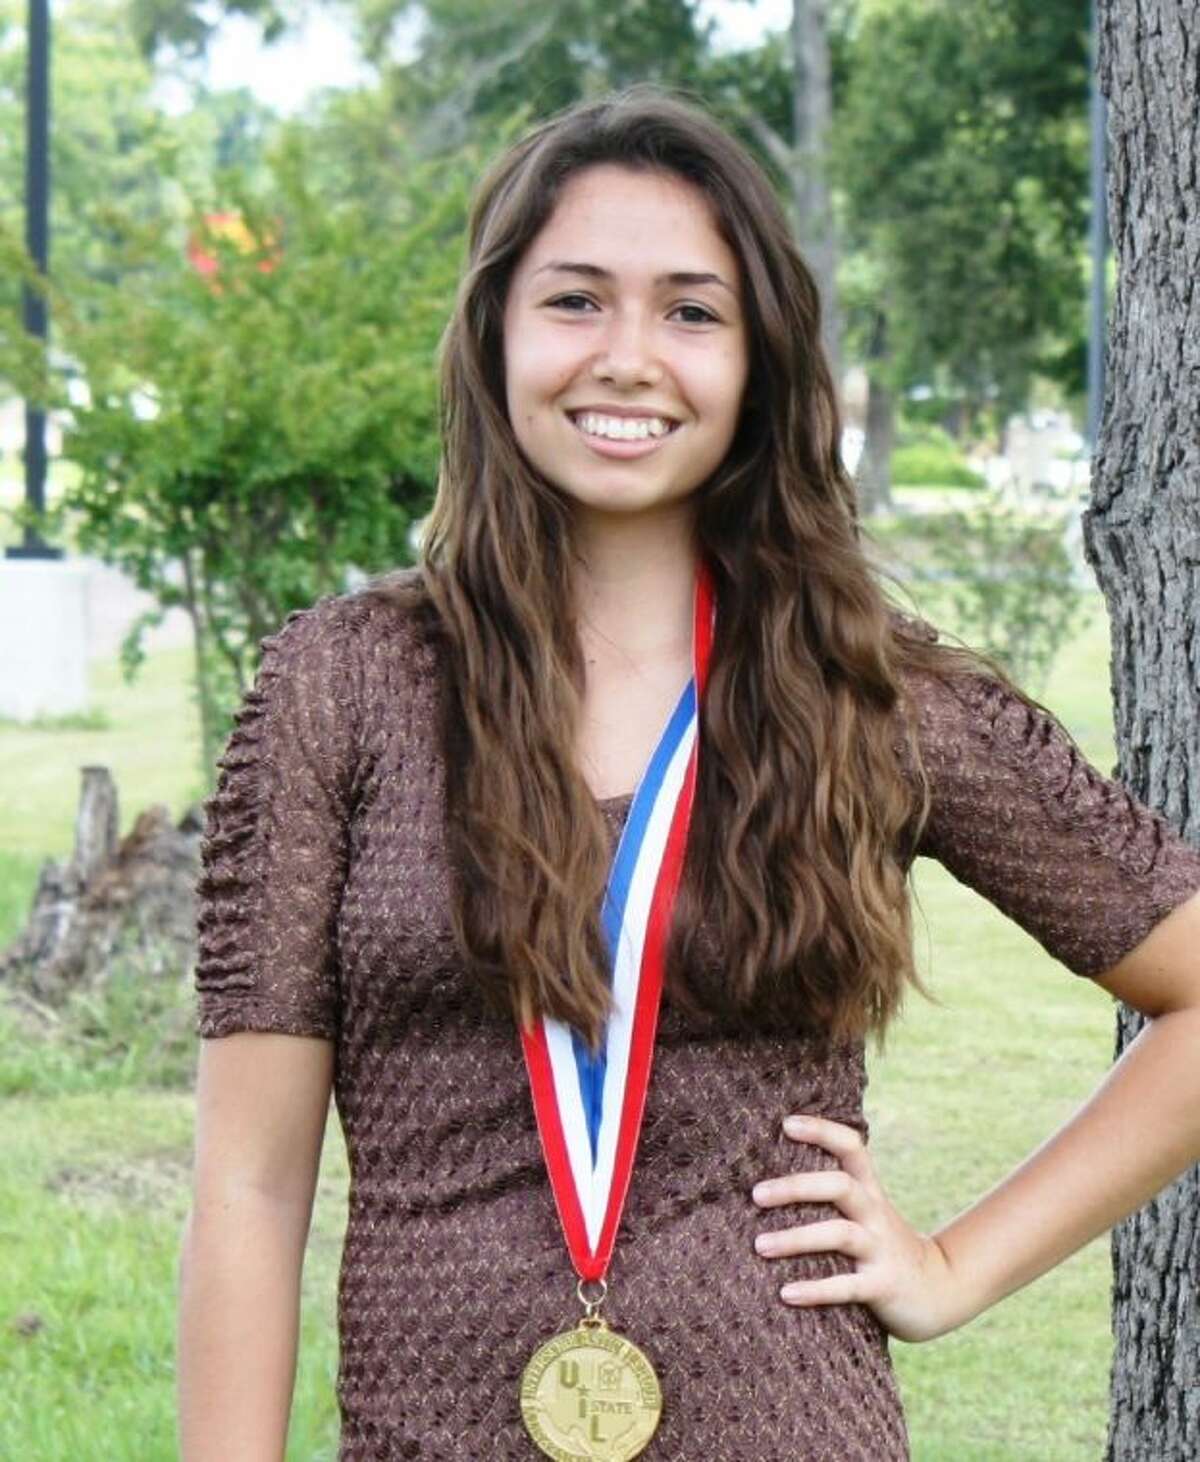 Briana Brewster earned the Outstanding Soloist award at the UIL State Solo and Ensemble competition in Pflugerville, Texas.